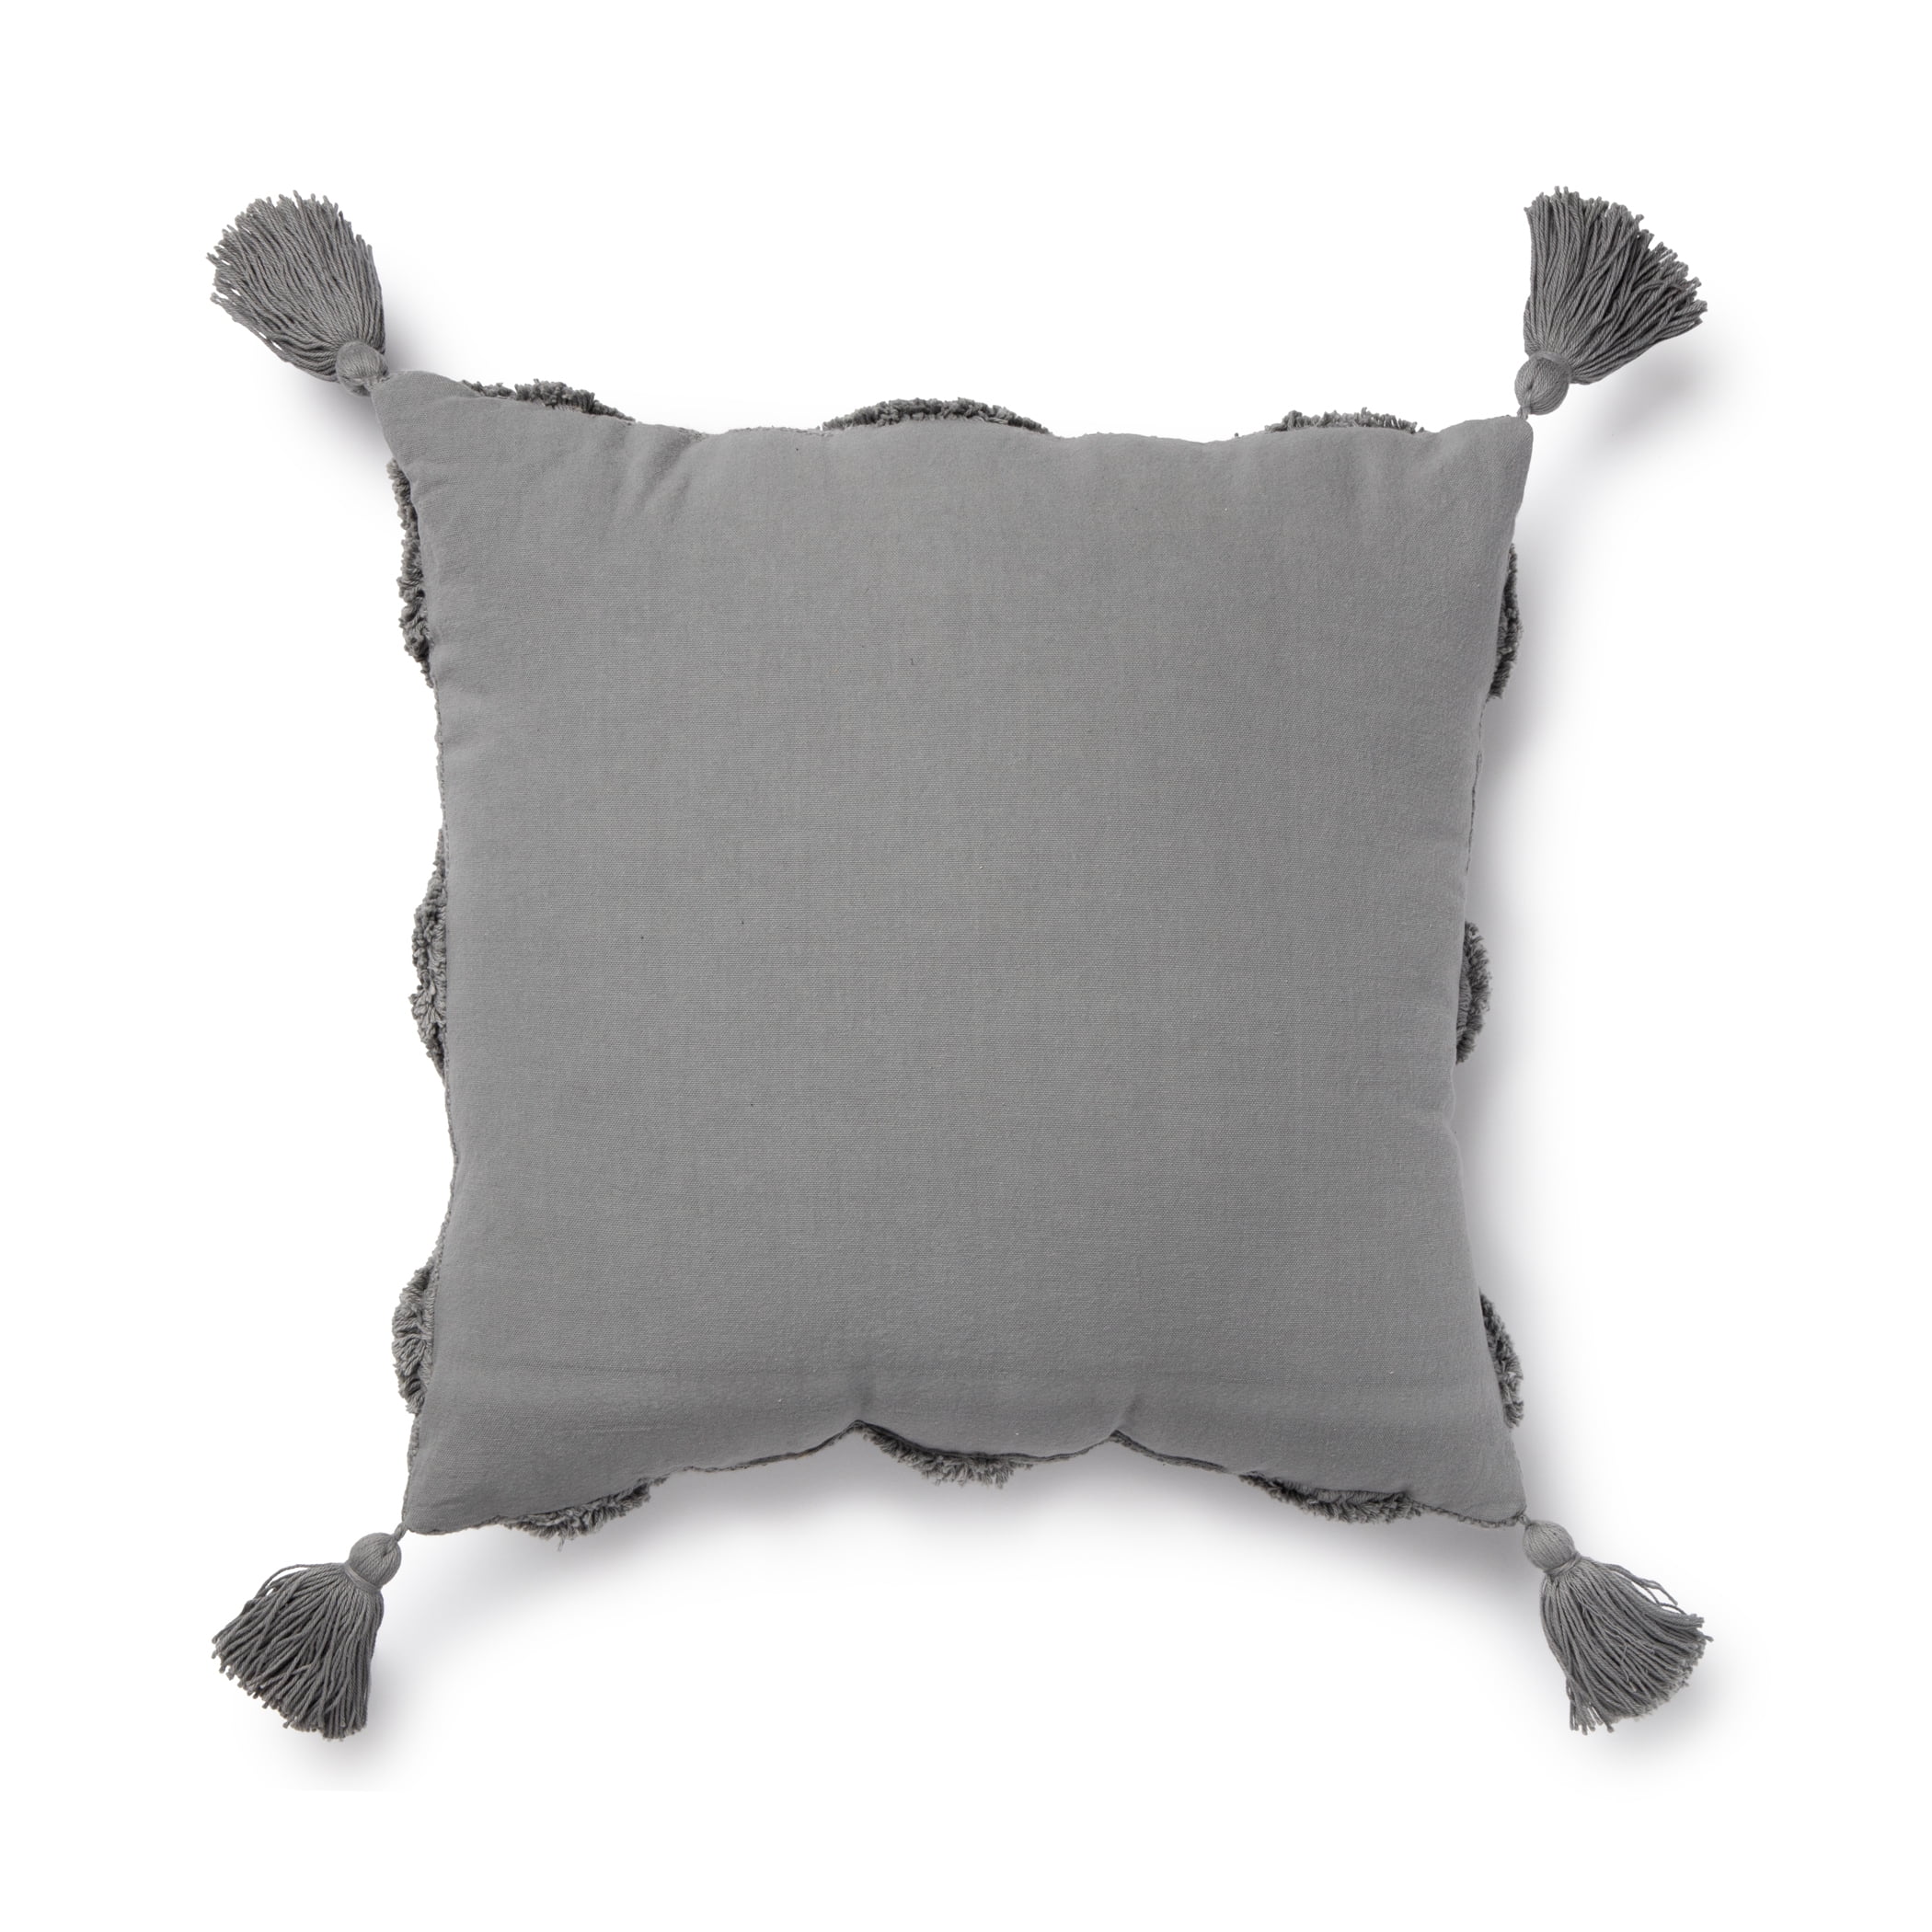 Windham Black Square Embellished Decorative Throw Pillow 18 x 18 By –  Latest Bedding